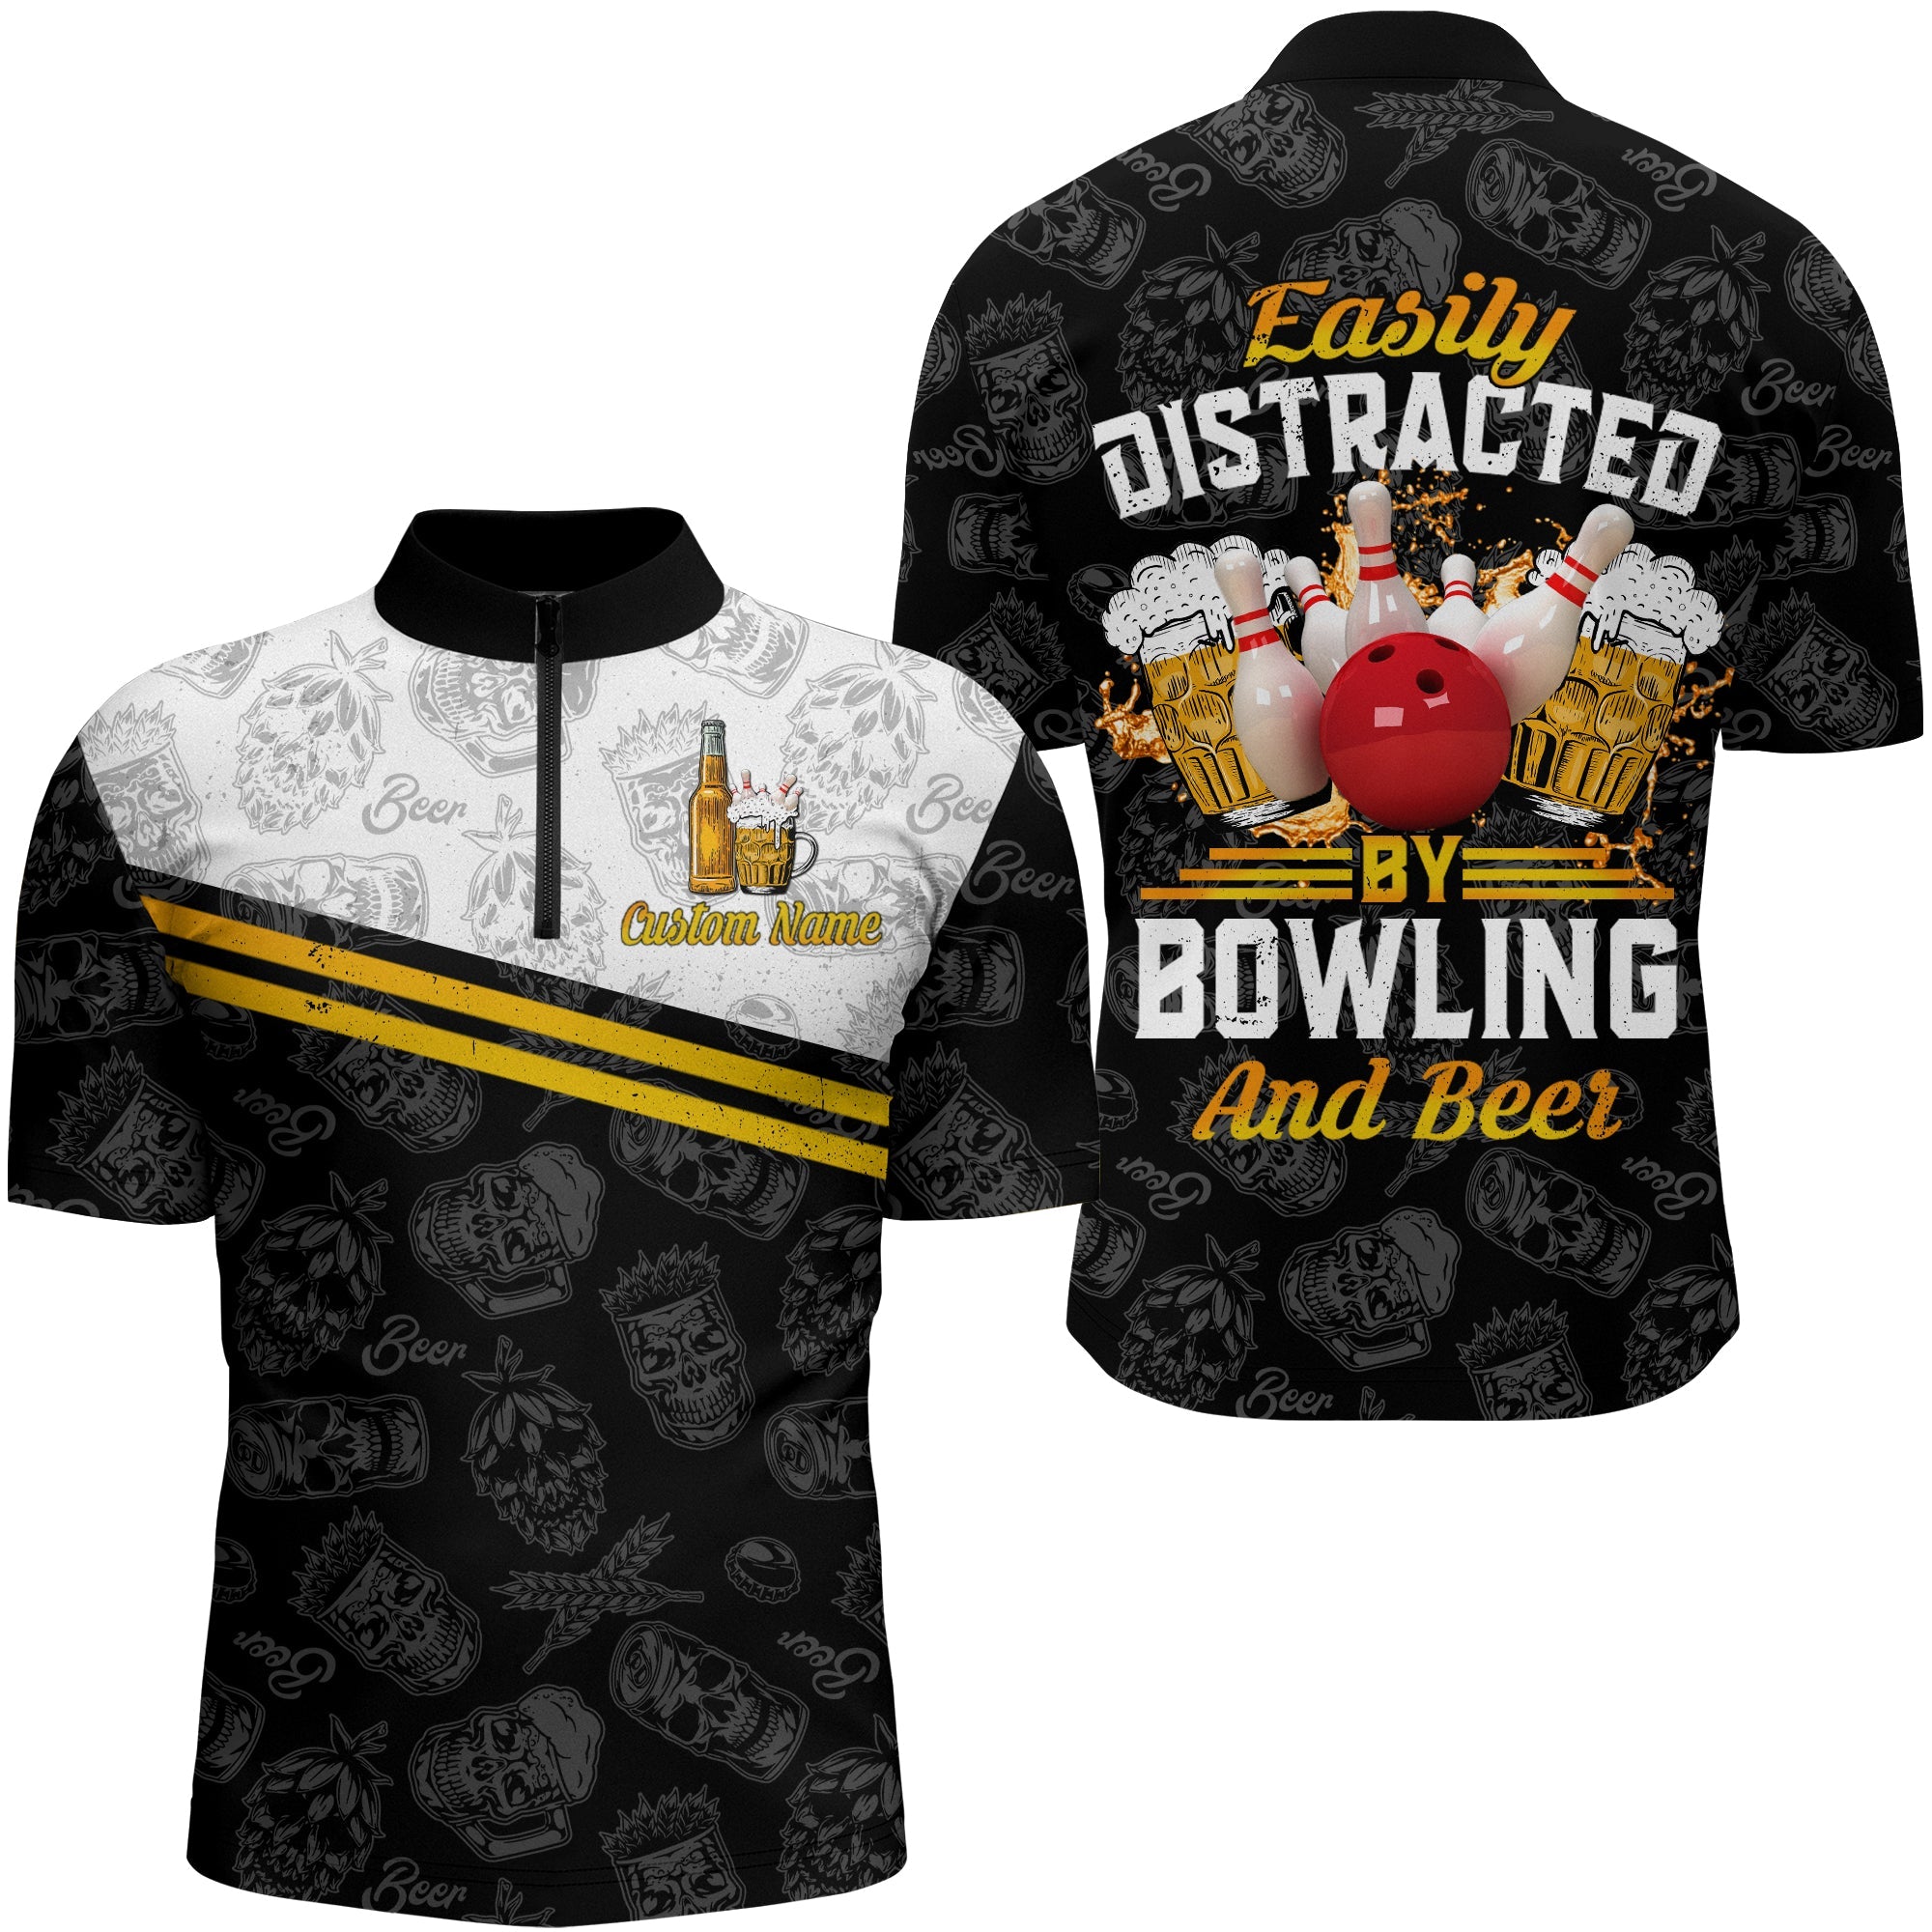 Funny Bowling Shirt for Men Easily Distracted By Bowling and Beer Custom Bowling Jersey Quarter-Zip